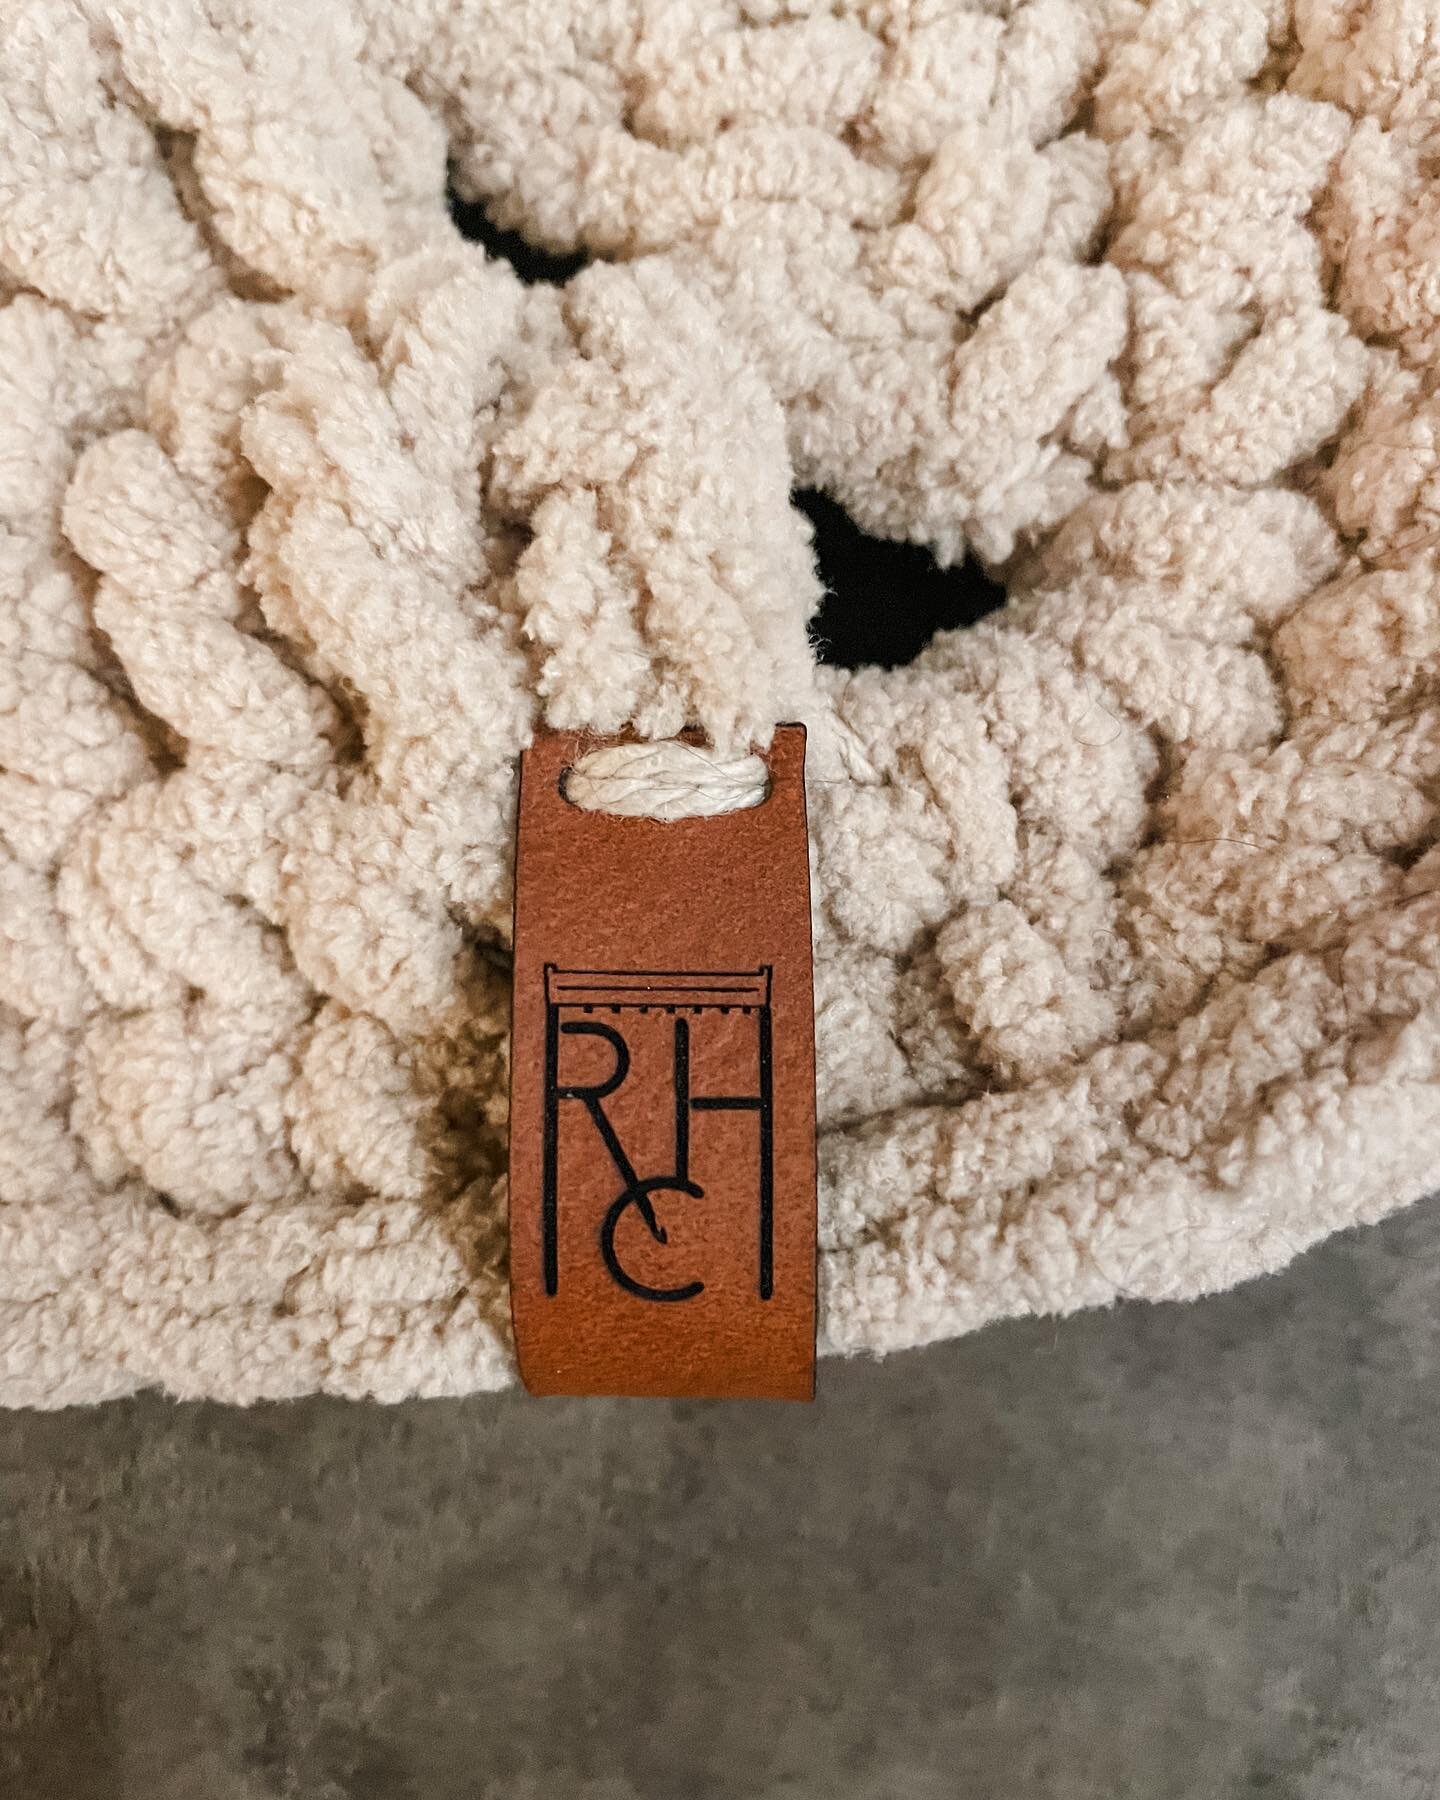 I love the finishing touch that these faux leather tags add! I&rsquo;m so happy with how they turned out! 🤗

Shout out to: @dark.timber.apparel for tagging the maker of her tags &hellip;&amp; shout out to @allthiswood.llc for the phenomenal and quic